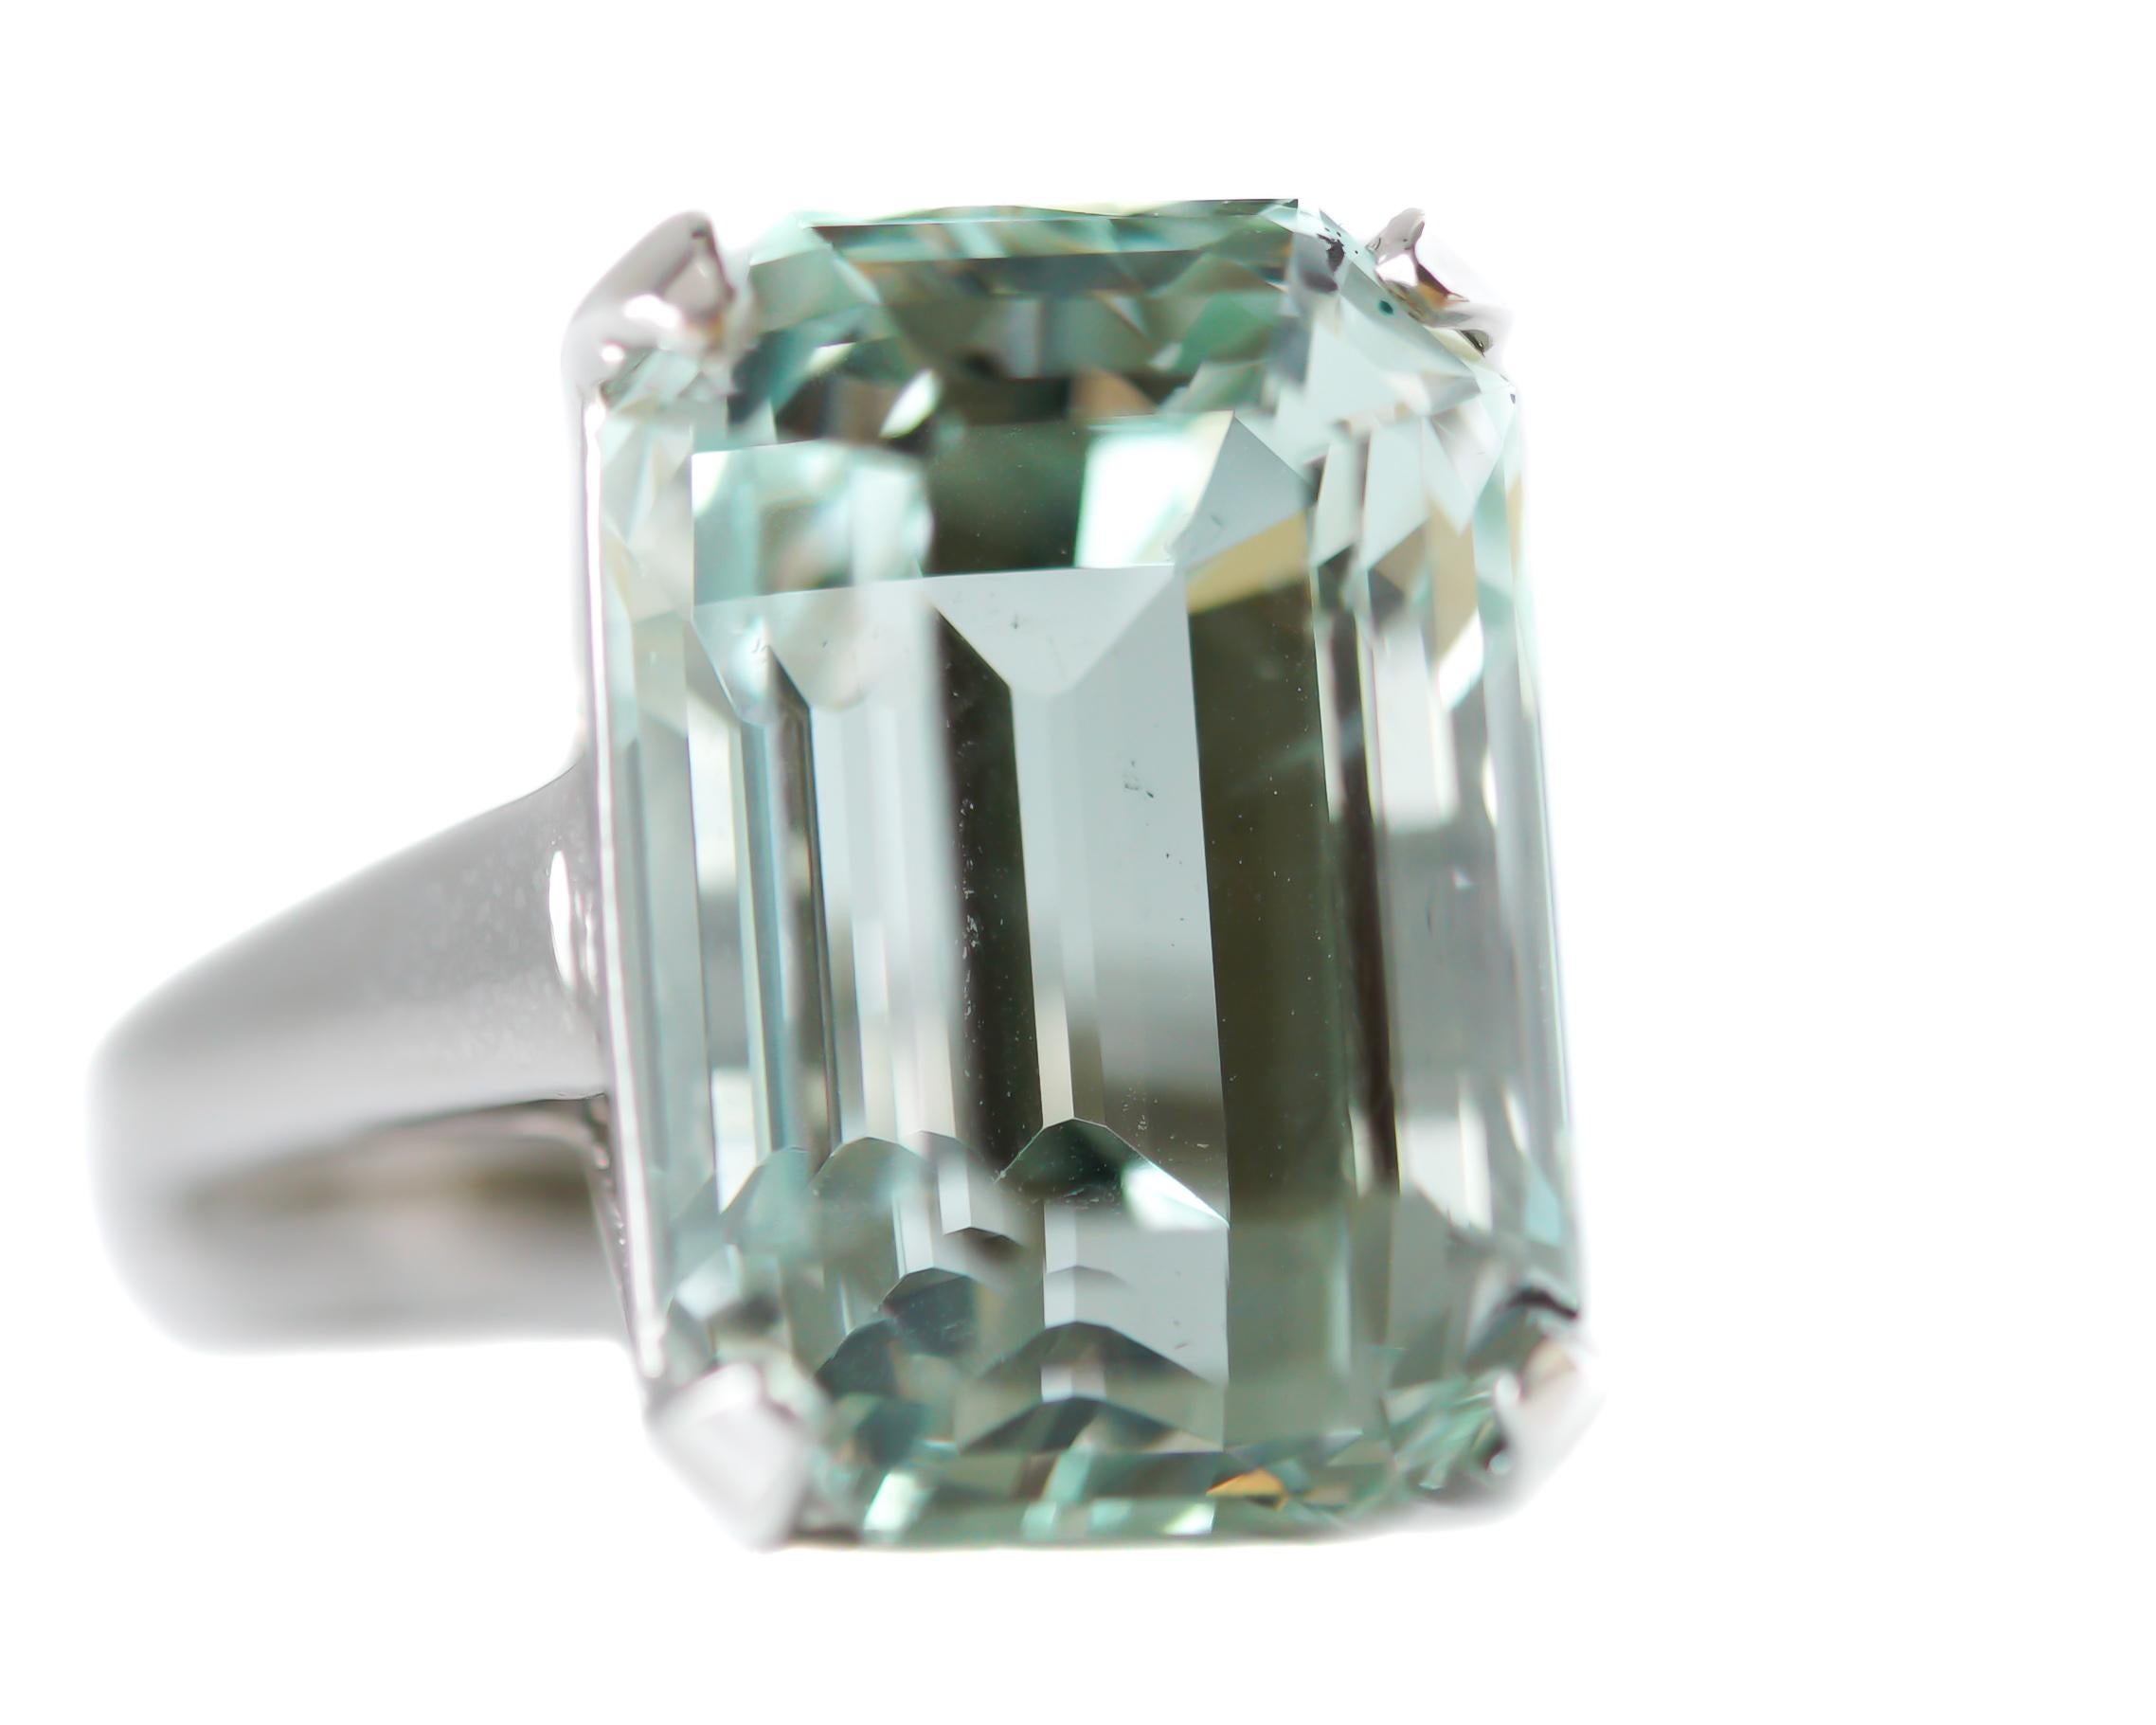 Stunning Aquamarine Ring crafted in 14 karat White Gold

Features: 
18.48 carat Emerald cut Aquamarine
Aquamarine is Light Sea Foam Green in Color
14 karat White Gold Cathedral Setting, Art Deco-Inspired Design Setting
Ornate, Open Gallery and